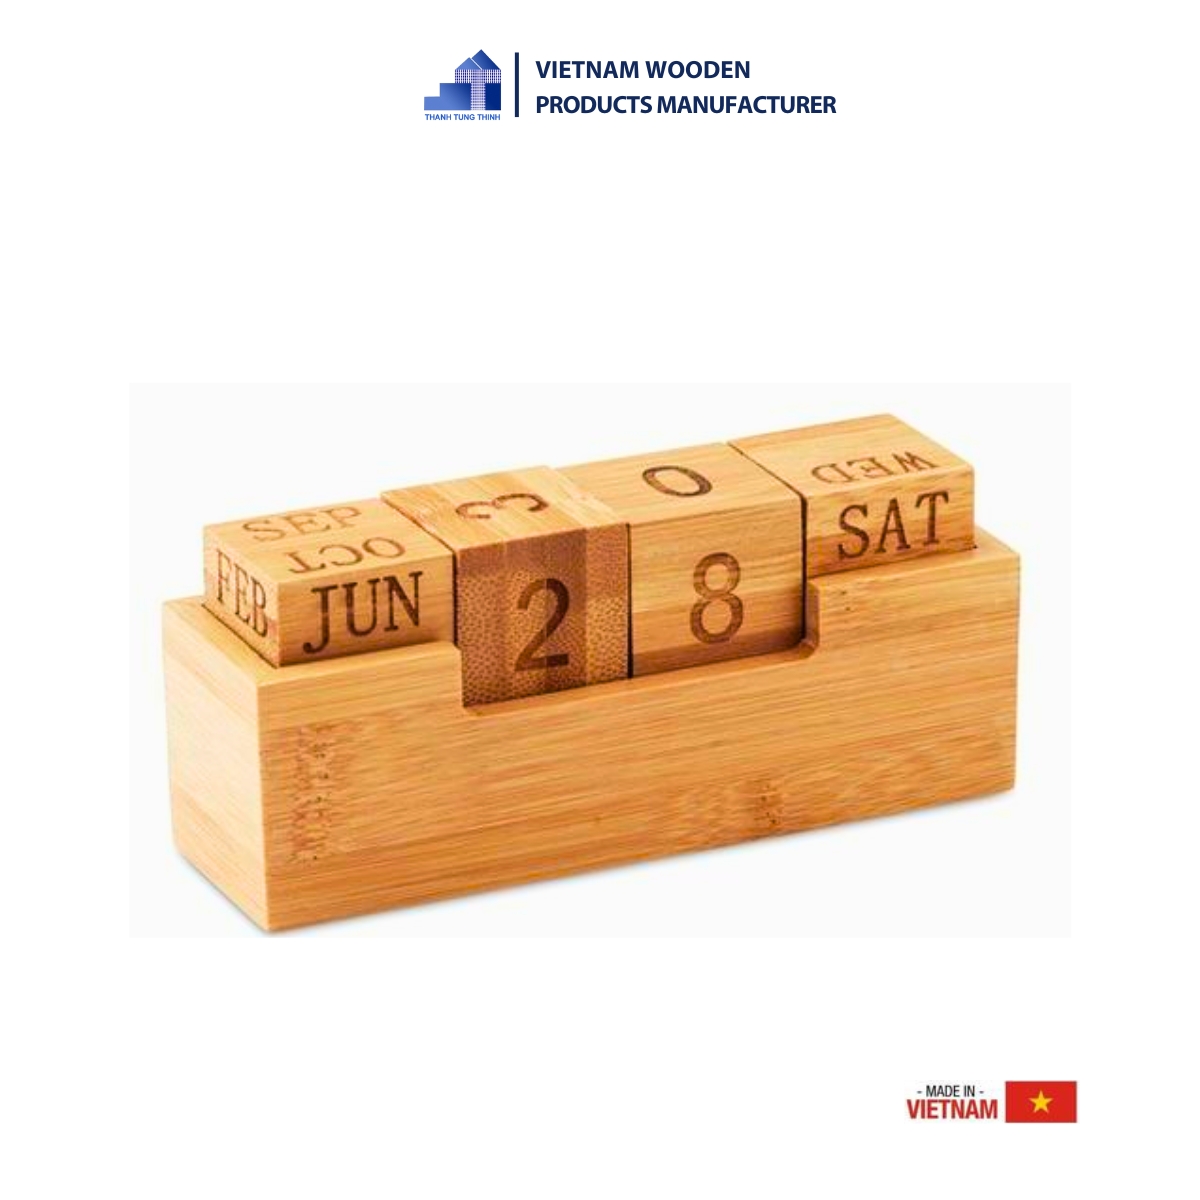 The unique wooden desk calendar is specifically designed for office professionals